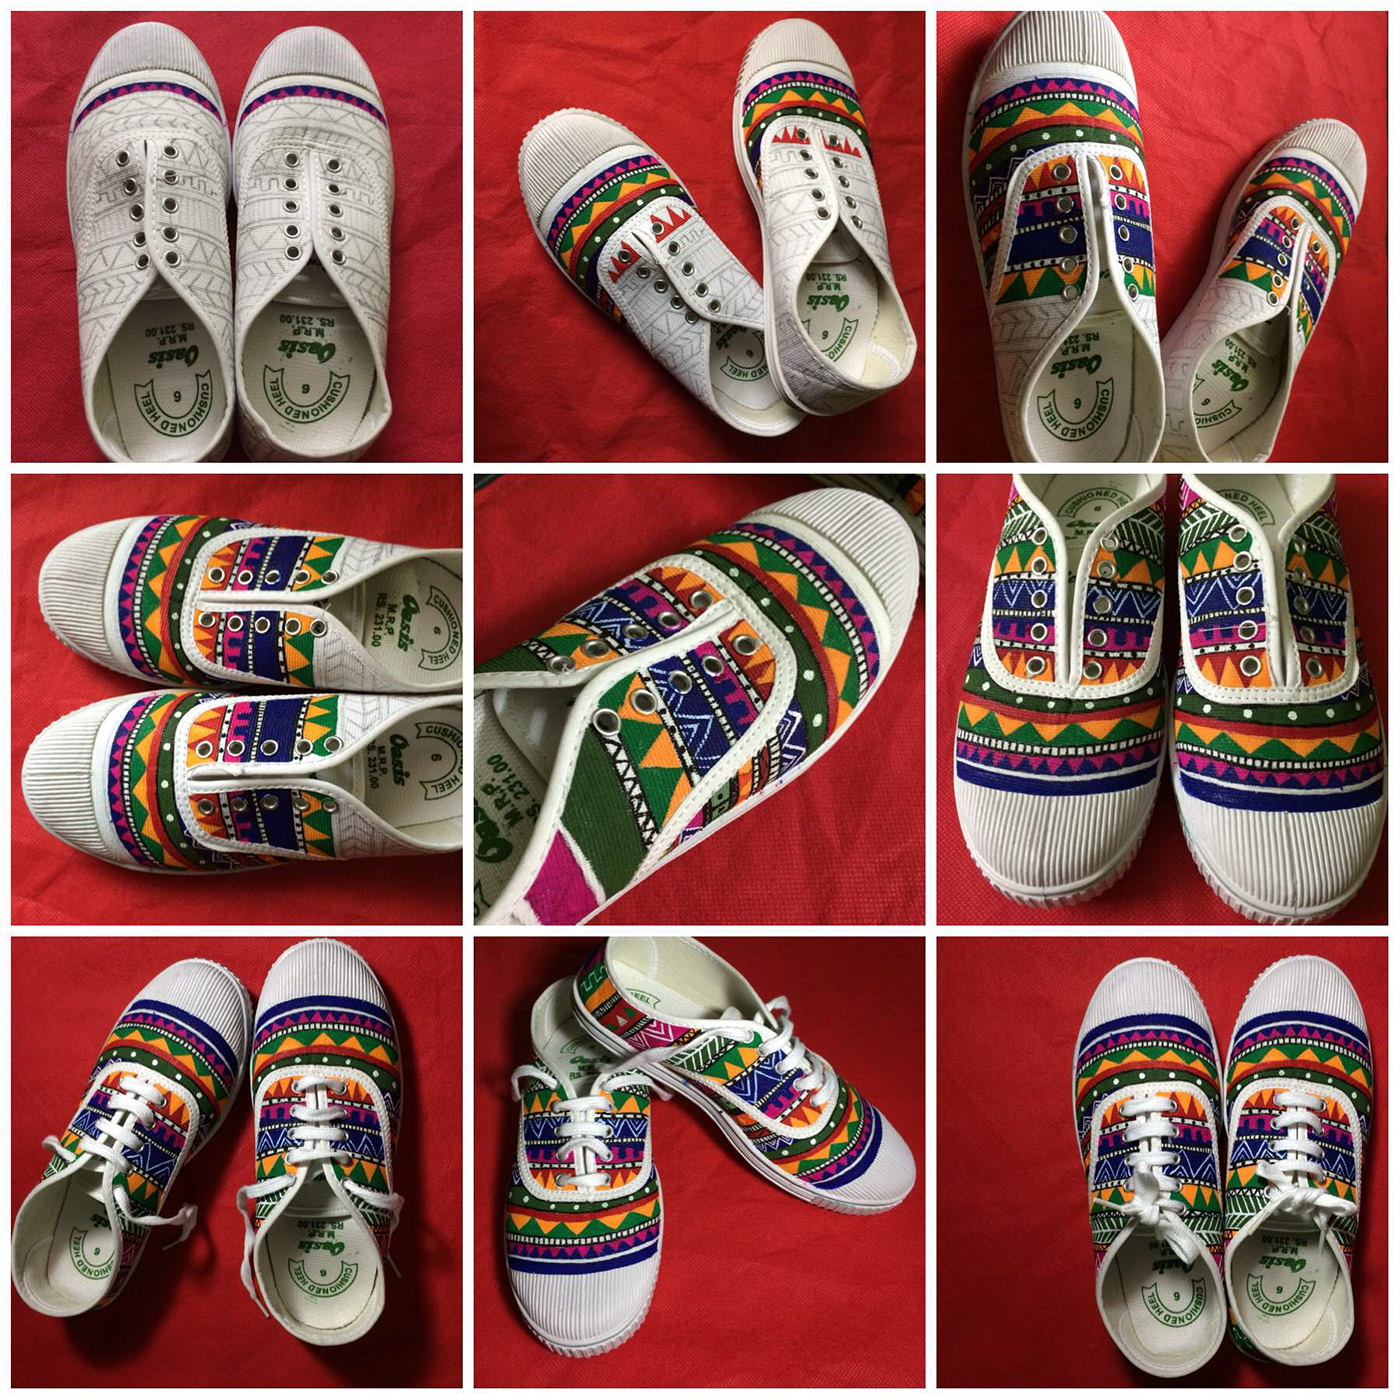 Hand Painted shoes Painted Sneakers aztec pattern shoes colorful shoes aztec pattern graphic design  shoes design shoe painting acrylic painting pattern design 